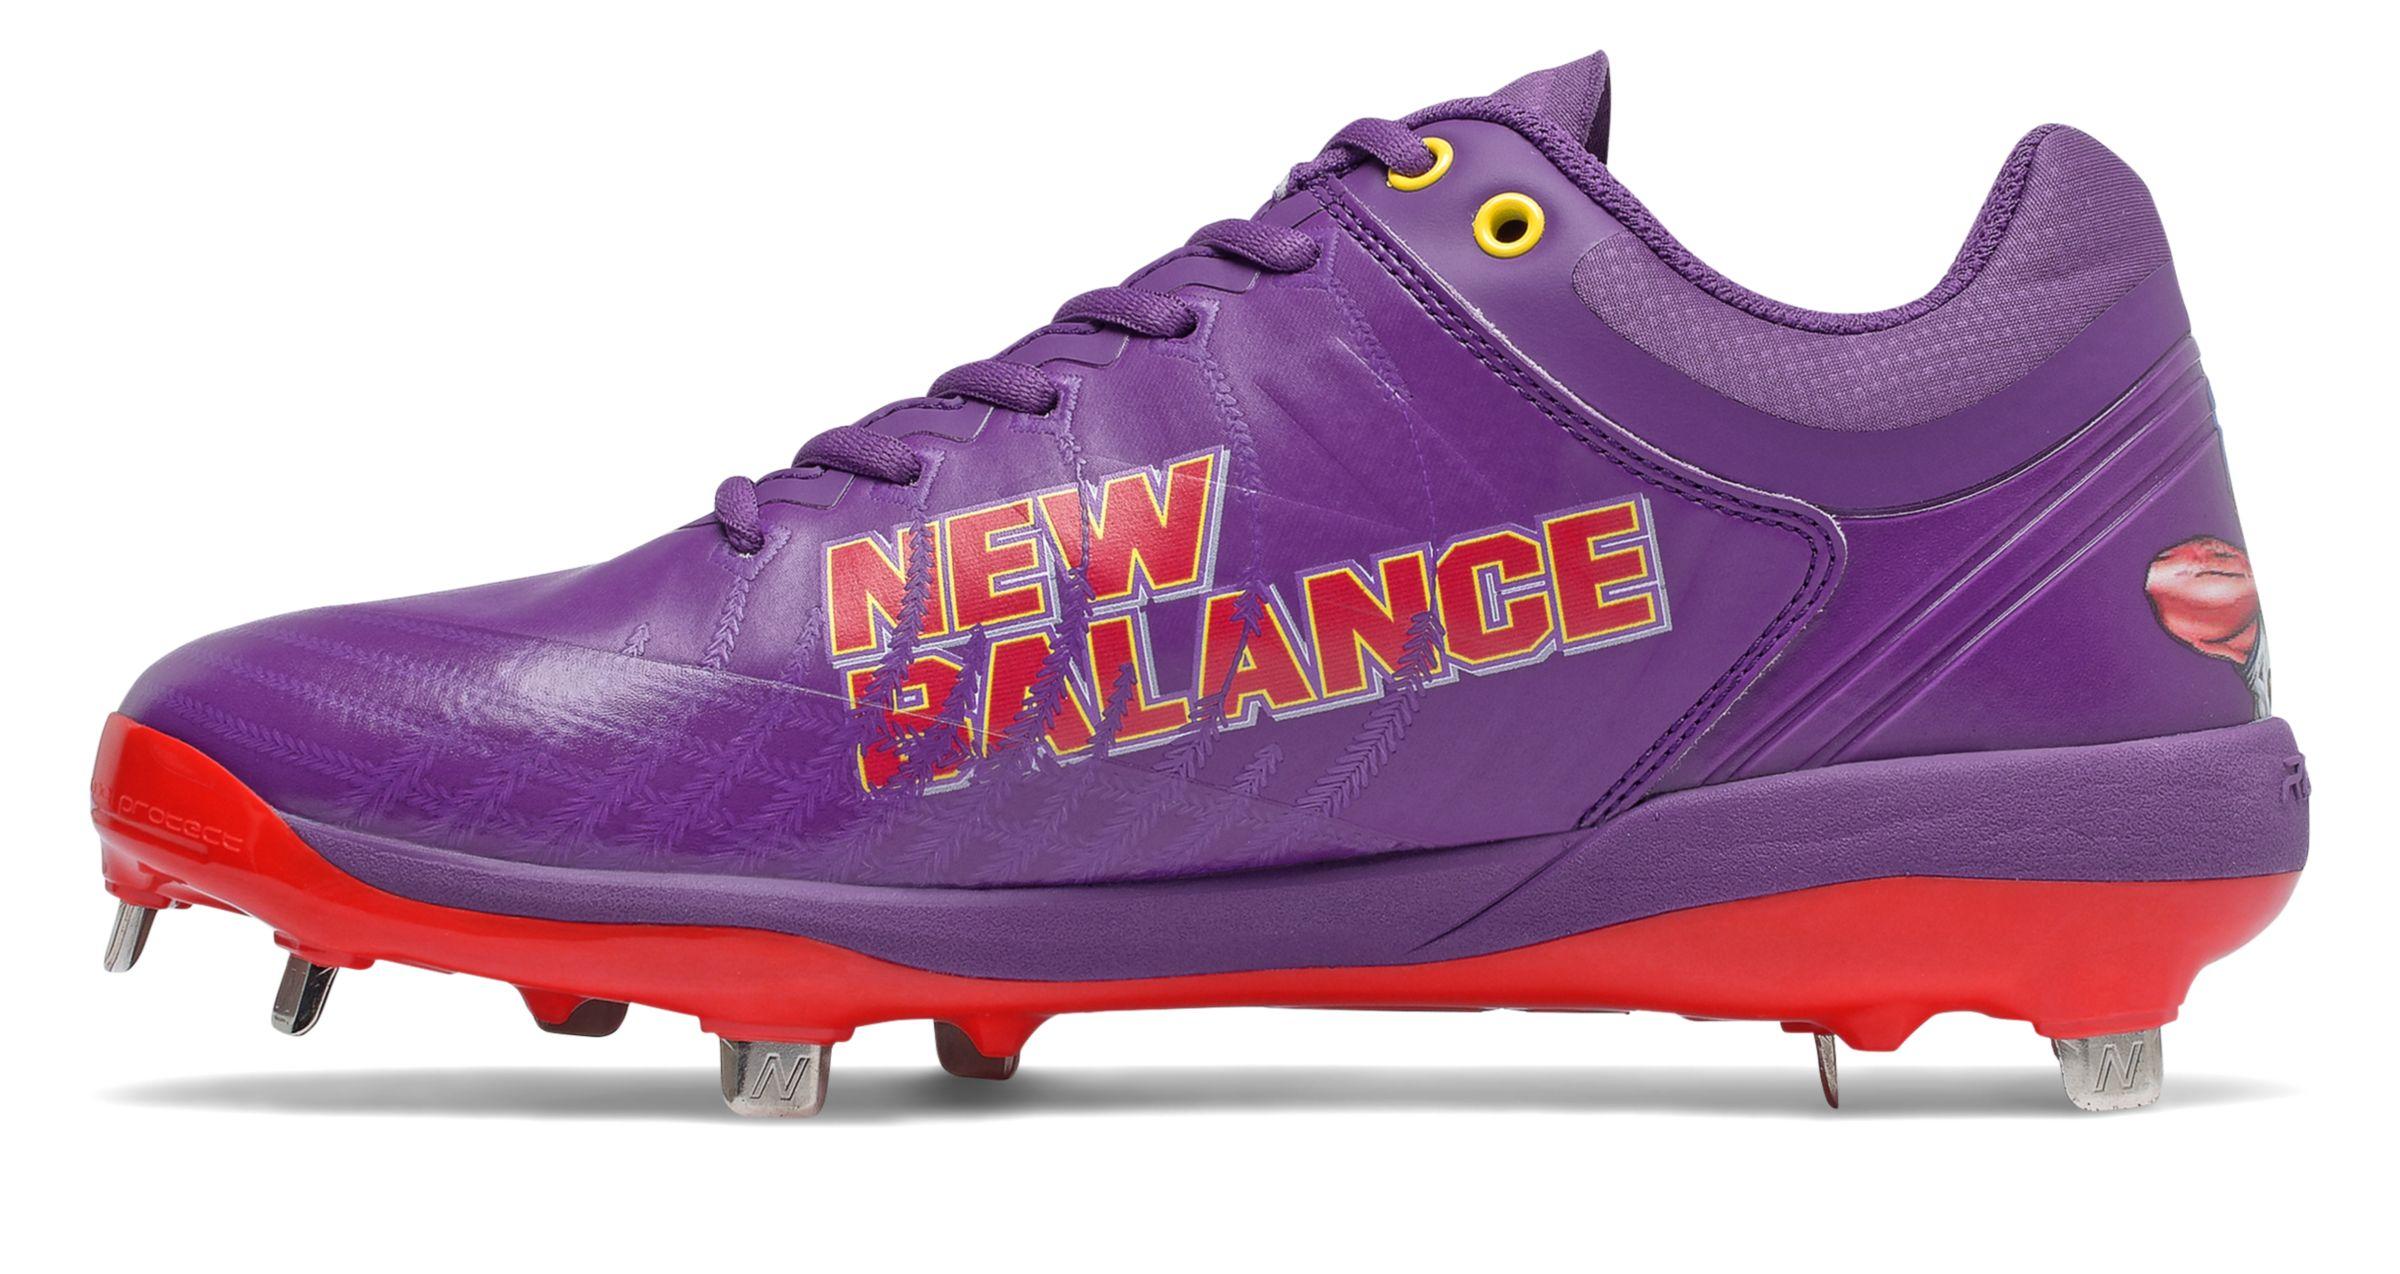 New Balance Nb X Big League Chew 4040v5 Cleats And Turf Shoes in Purple/Red  (Purple) for Men | Lyst